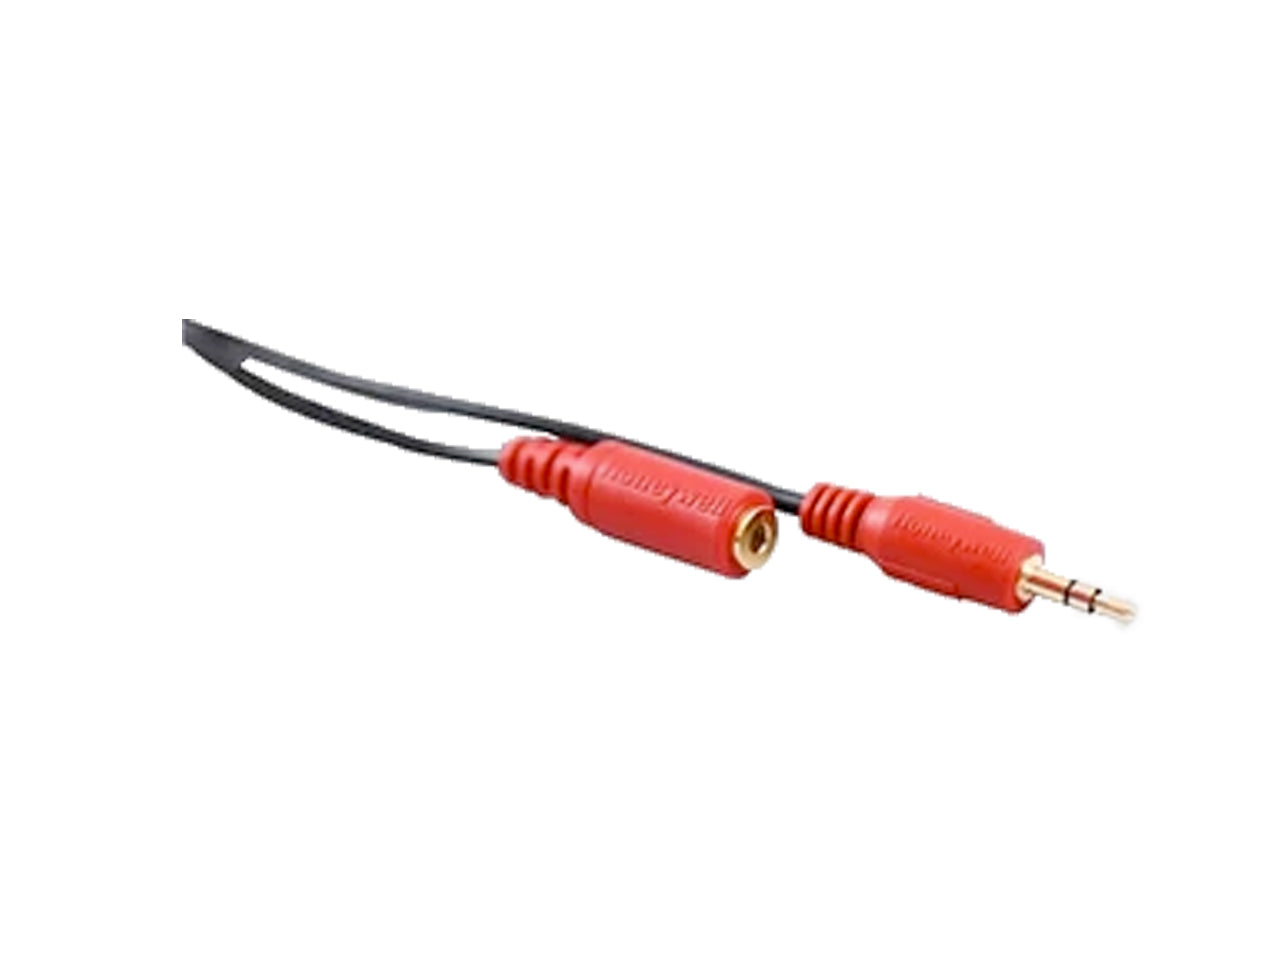 Honeywell Stereo Extension Cable 3.5mm (male - female) 2 Mtr